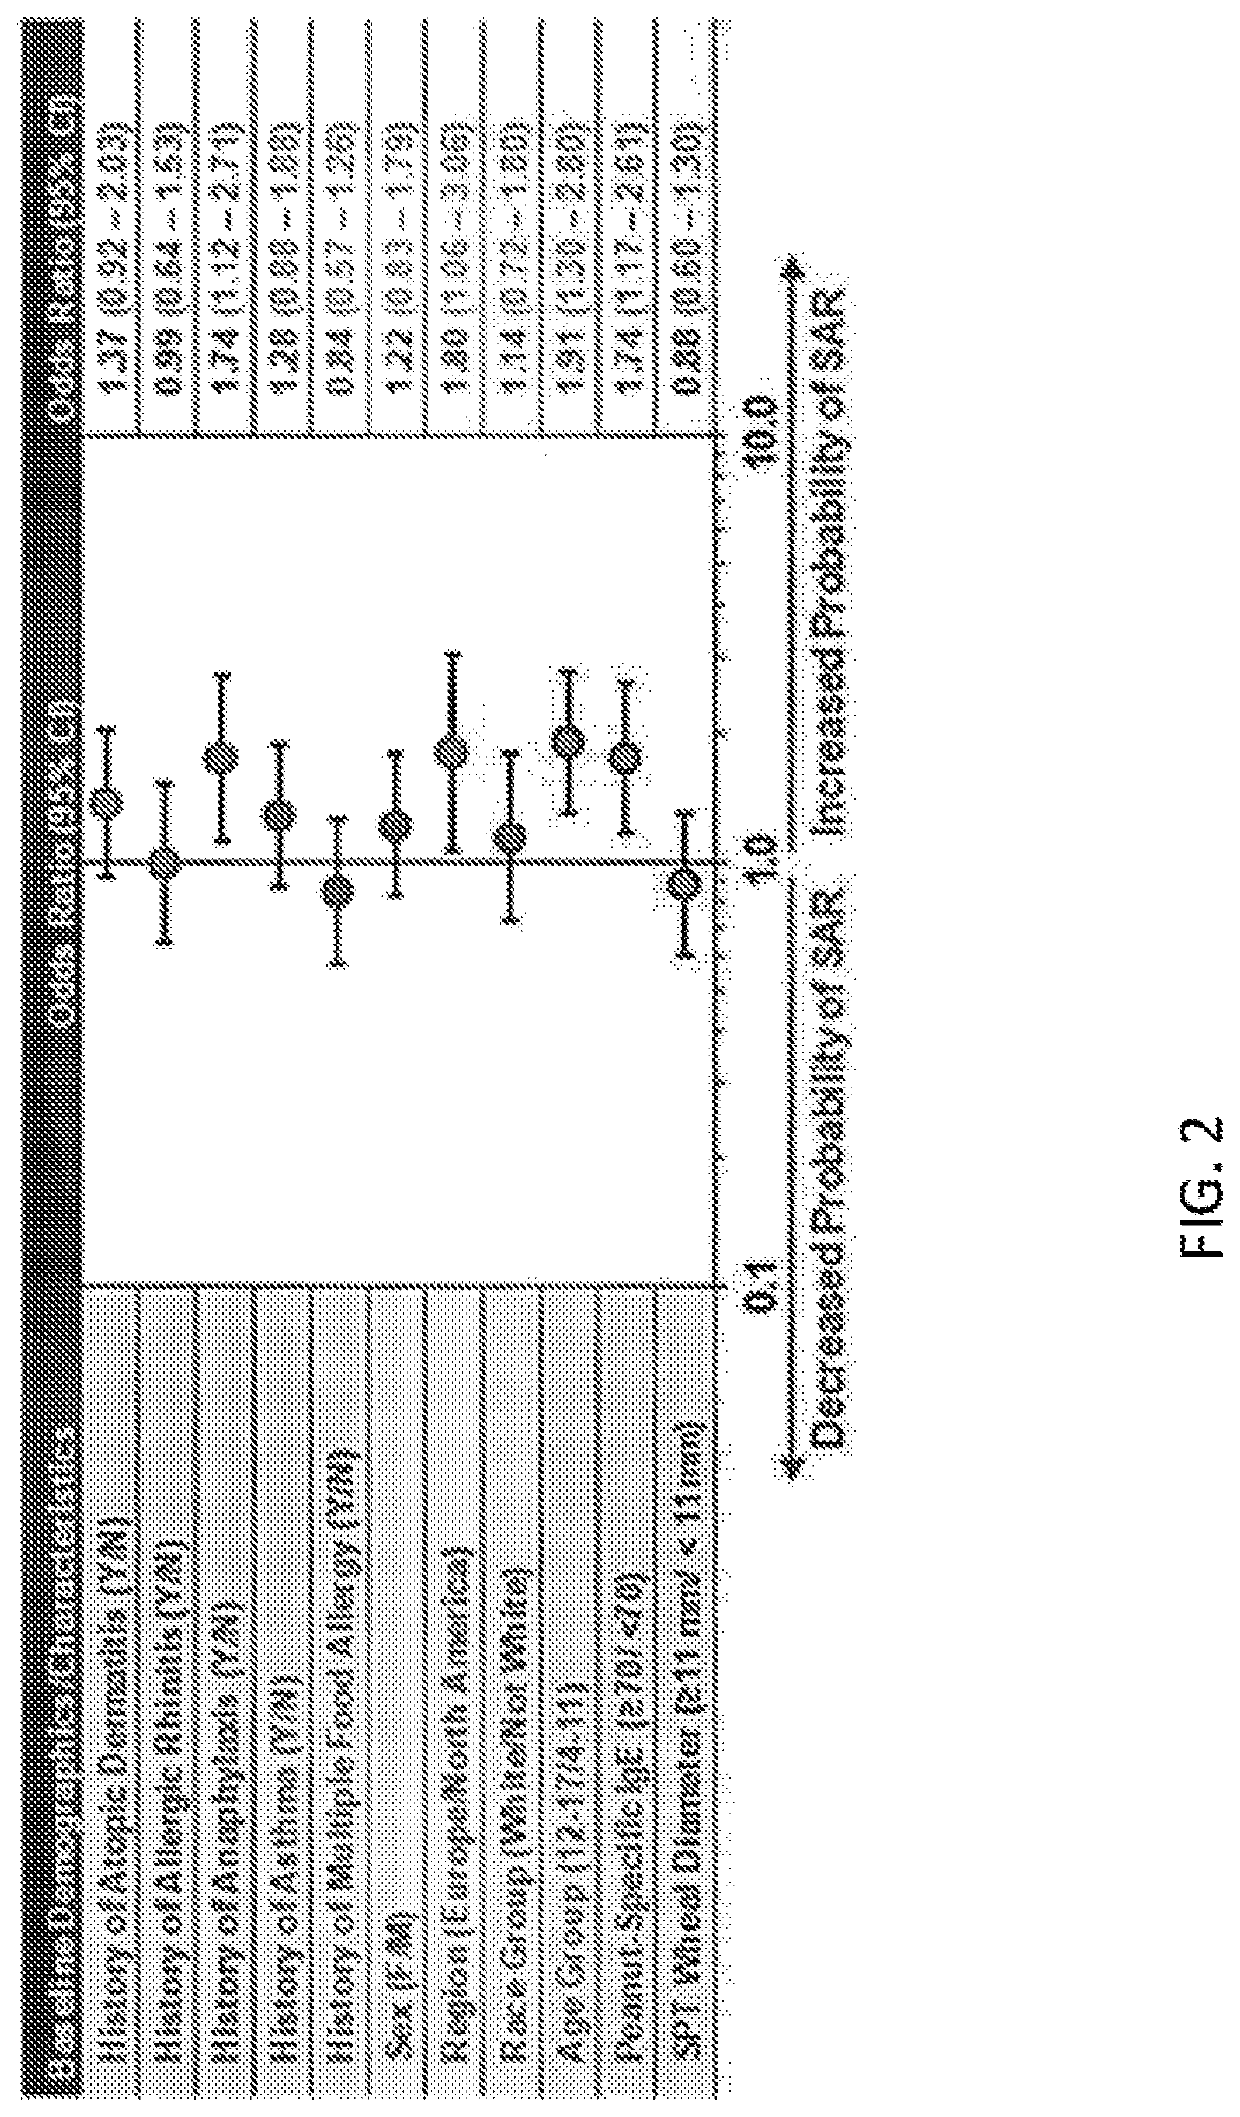 Systemic allergic response risk assessment in peanut oral immunotherapy